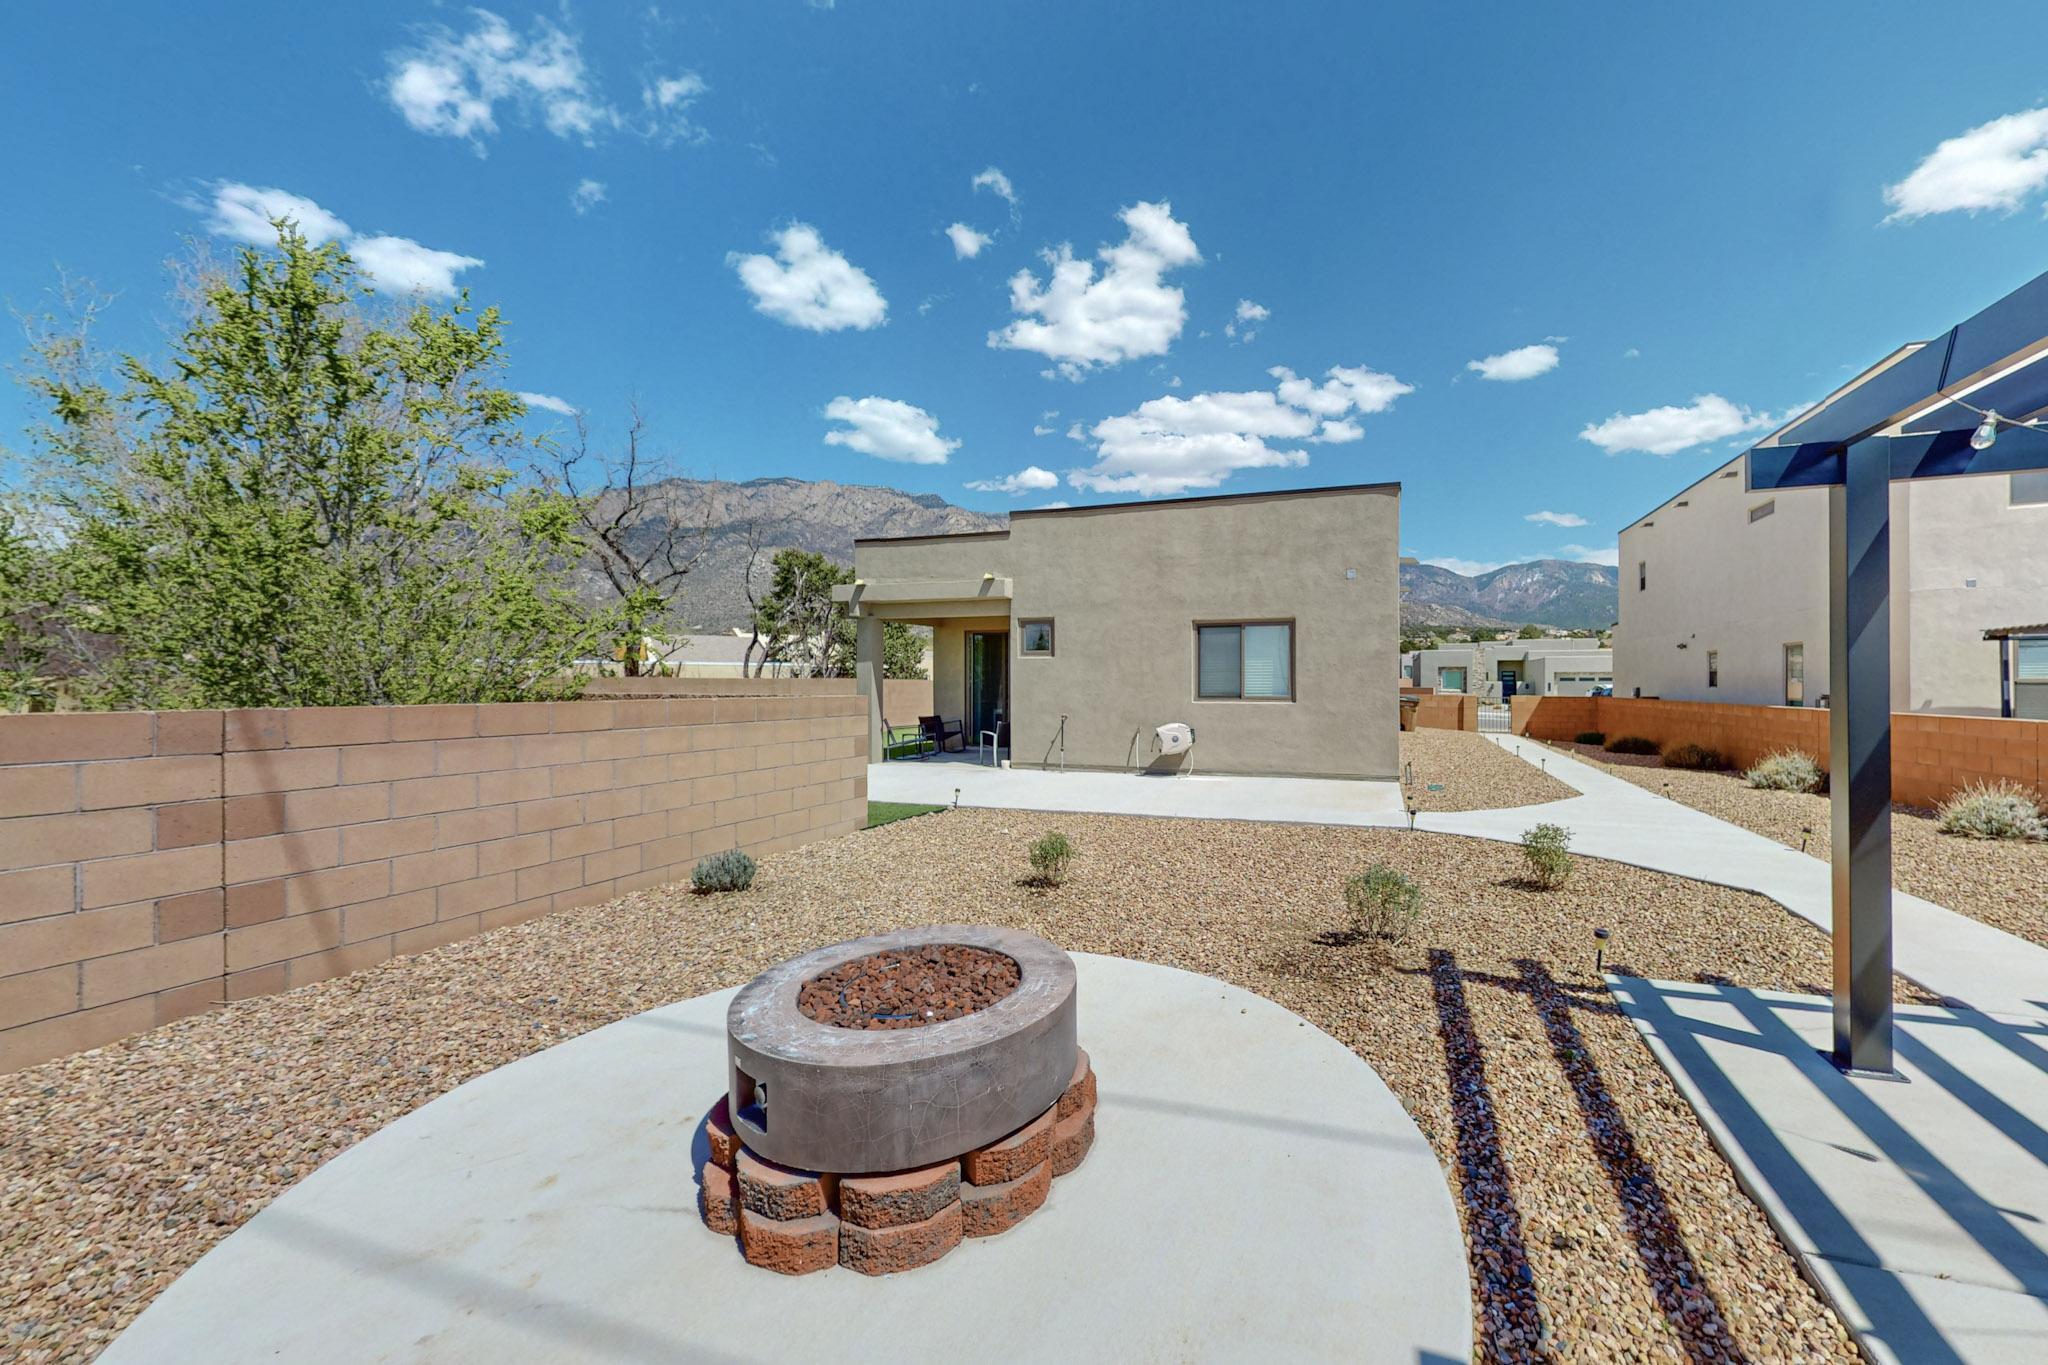 819 Horned Owl Drive NE, Albuquerque, New Mexico 87122, 3 Bedrooms Bedrooms, ,2 BathroomsBathrooms,Residential,For Sale,819 Horned Owl Drive NE,1061472